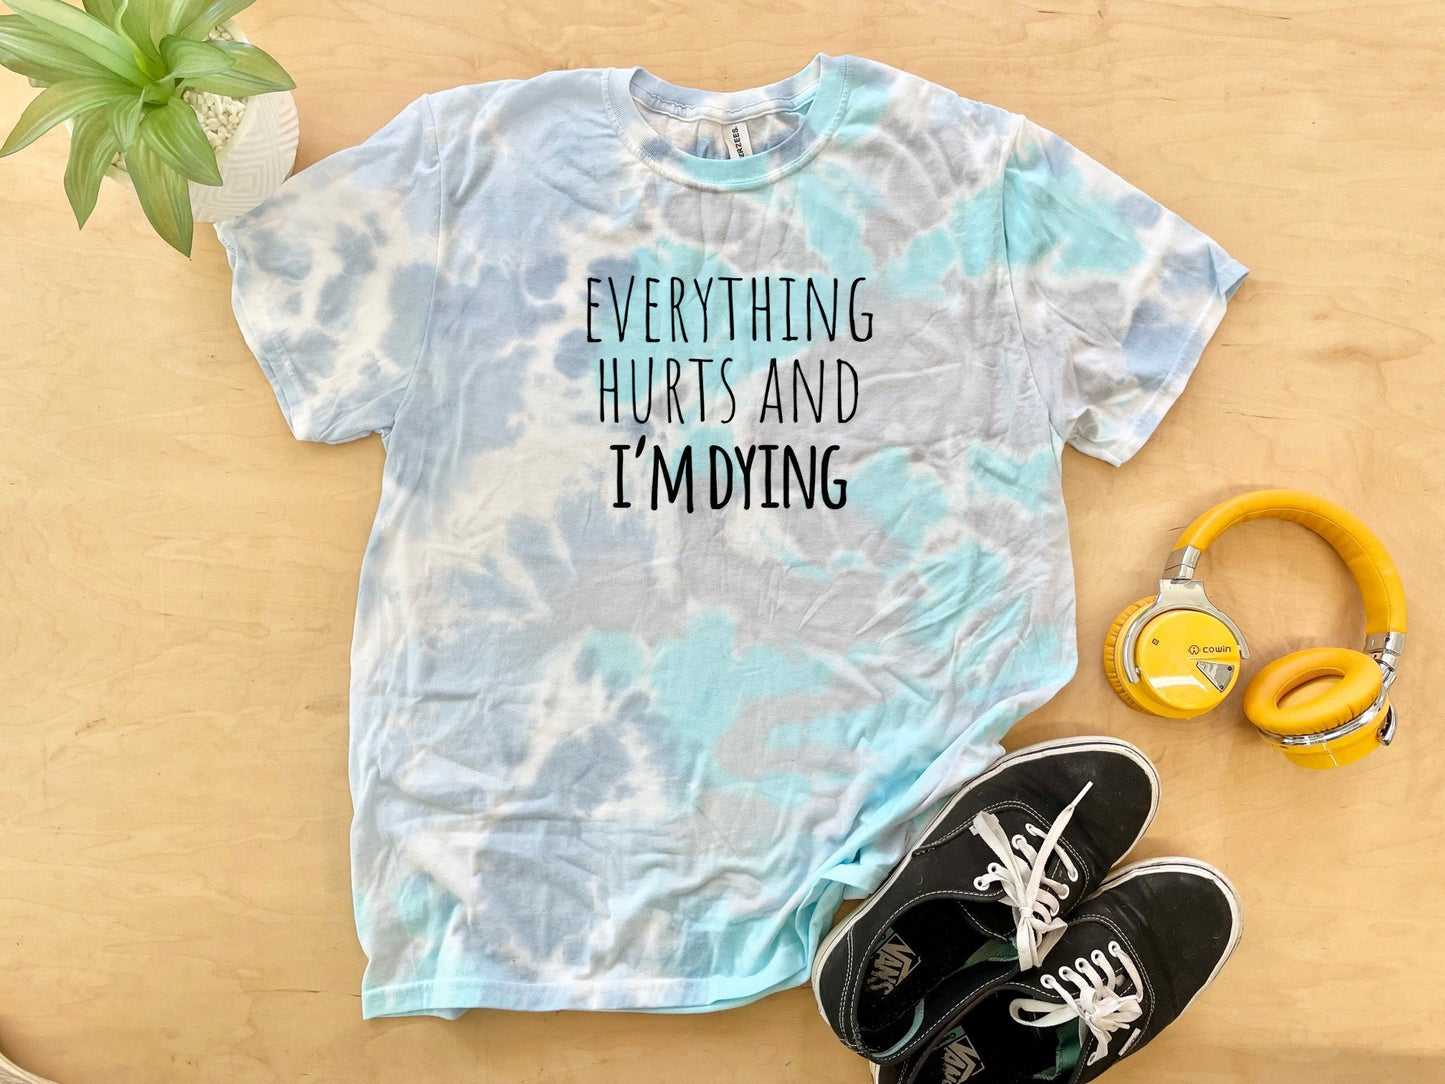 Everything Hurts and I'm Dying - Mens/Unisex Tie Dye Tee - Blue